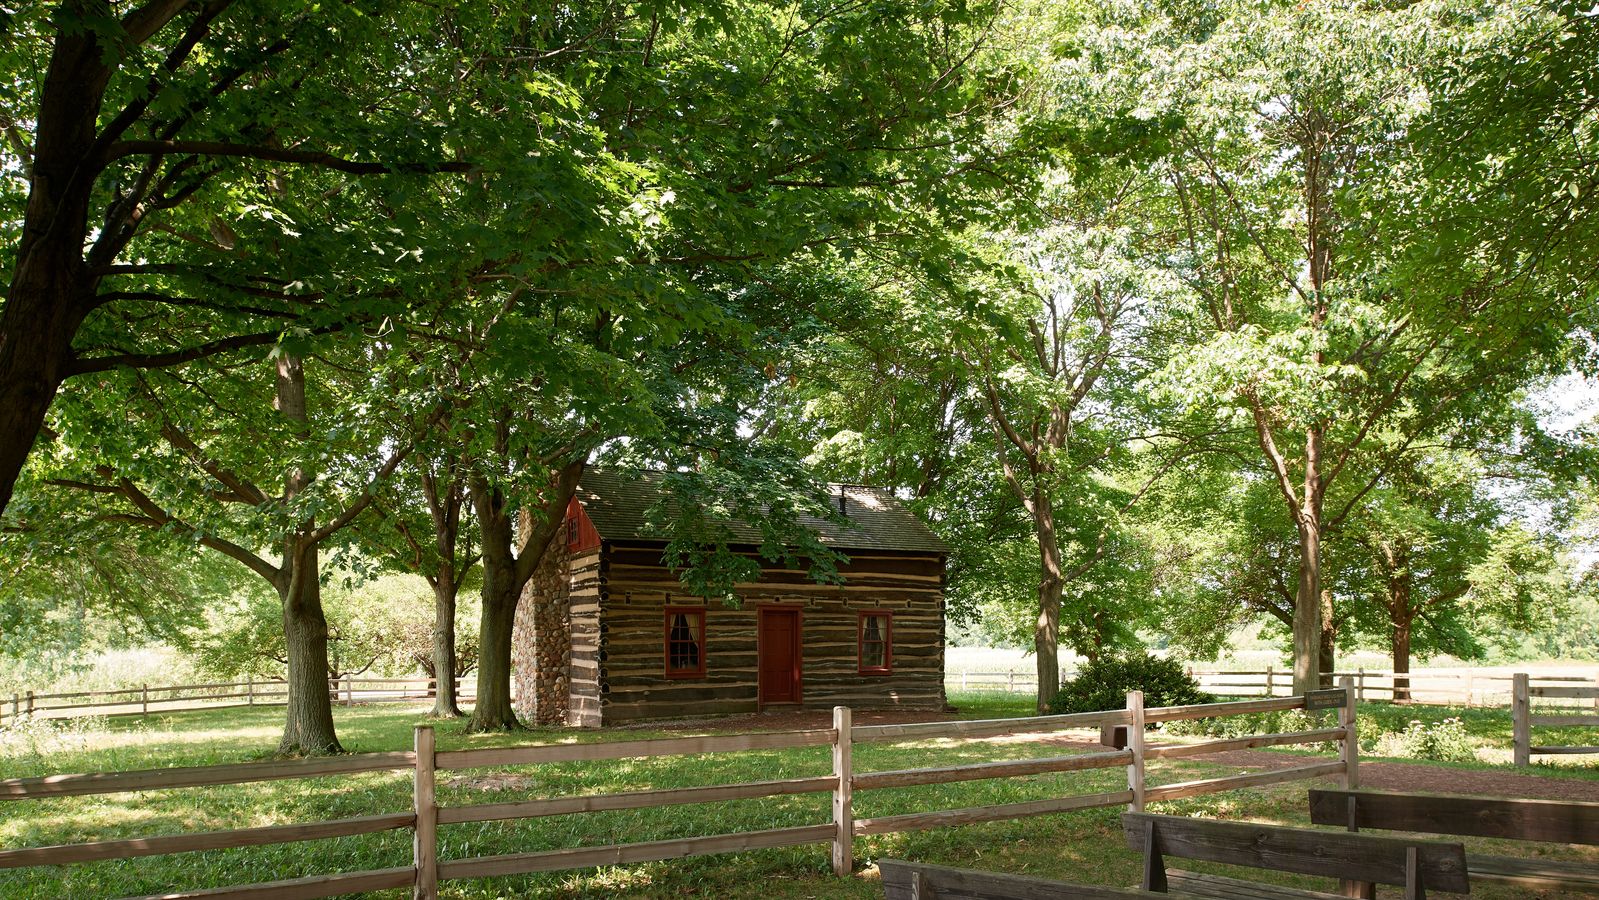 Exterior shots of the Peter and Mary Whitmer Farm. There is a log cabin with a red door. It is surrounded by trees.